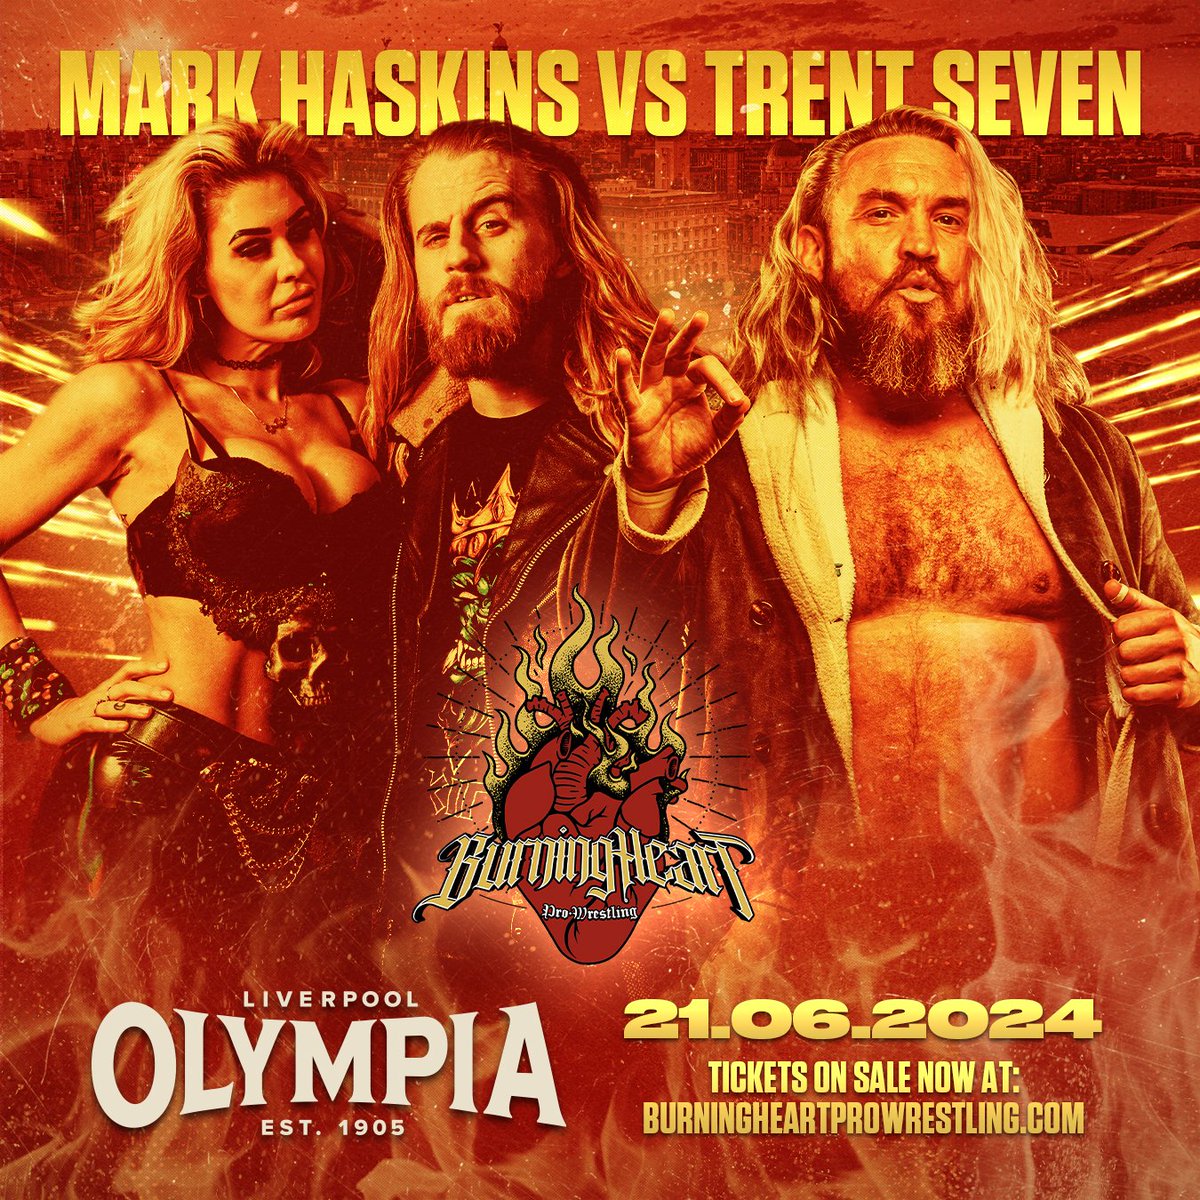 BREAKING! 🔥❤️ 2 pillars of modern British wrestling will collide at the historic Liverpool Olympia when 'Overkill' Mark Haskins takes on 'The Don' Trent Seven! Pro wrestling with heart = these 2 men! Tickets for our full debut weekender are on sale now! Link in our bio 🎟